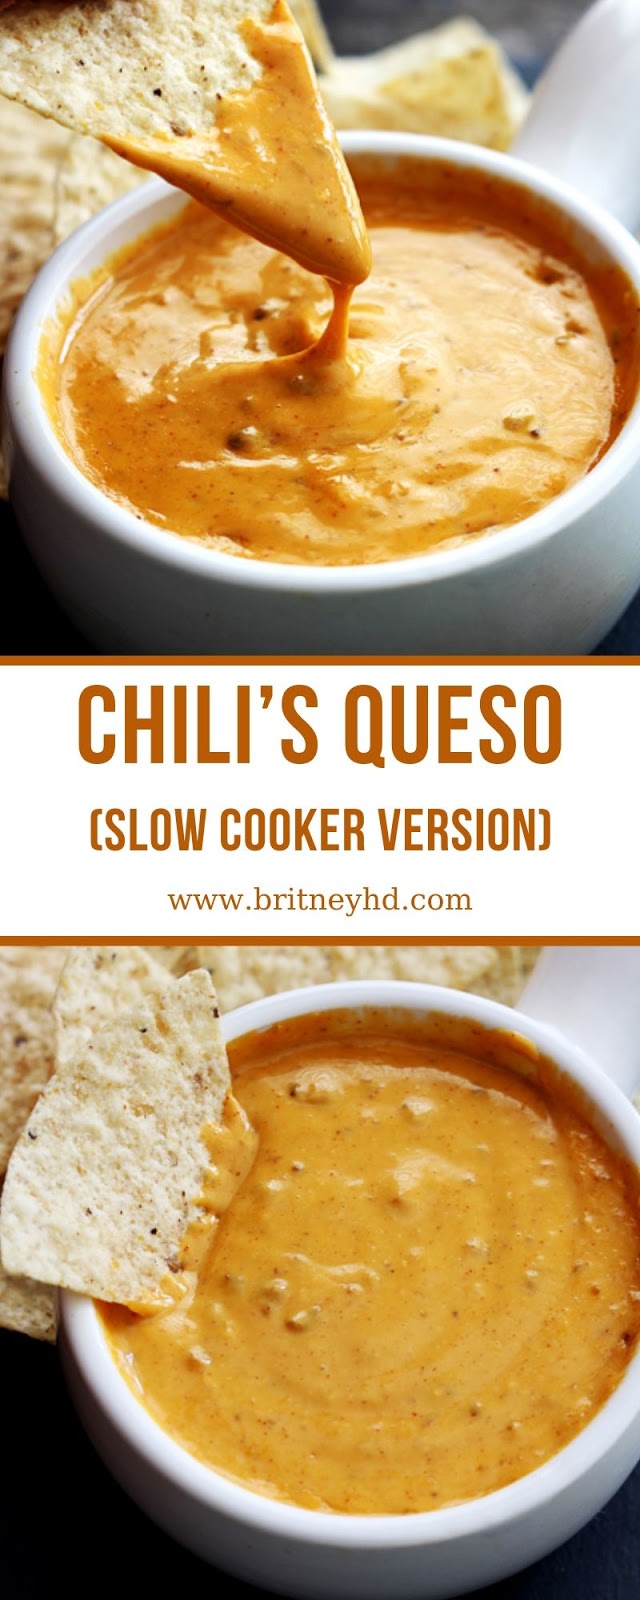 CHILI’S QUESO (SLOW COOKER VERSION)